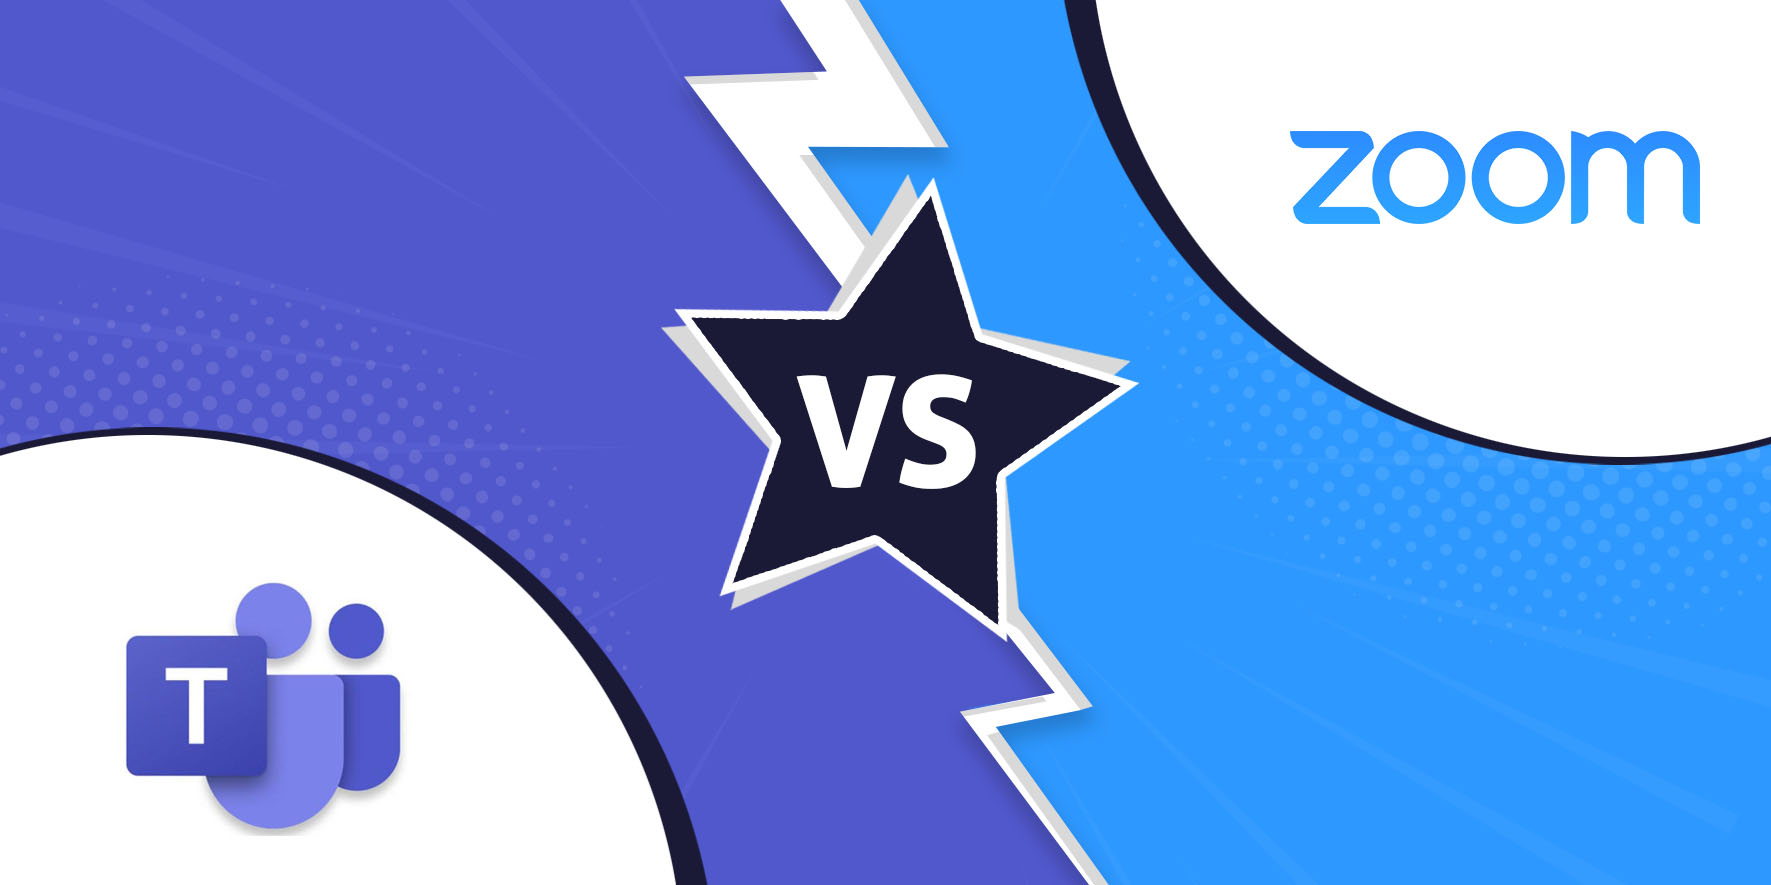 Microsoft Teams vs. Zoom - Which is Better?